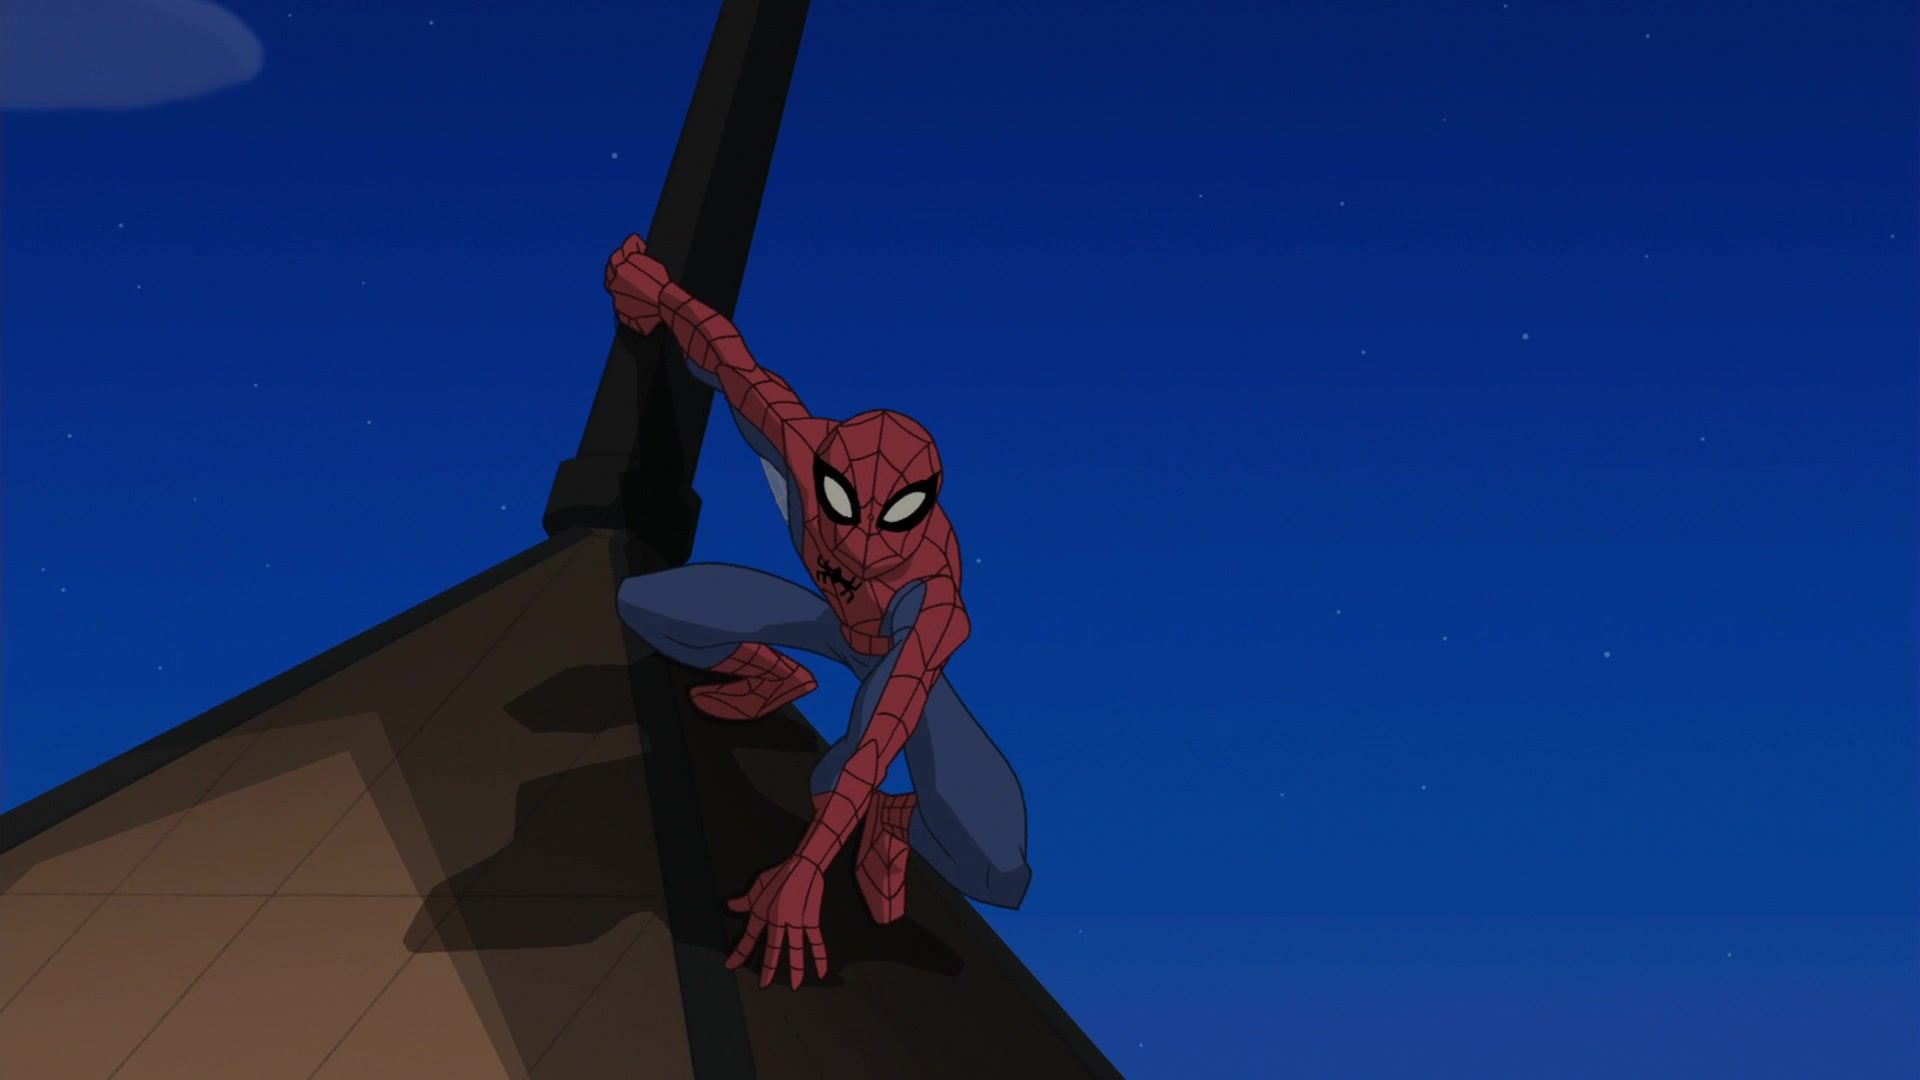 1920x1080 The Spectacular Spider-Man Season 1 Image in 2022 | Spectacular spider man, Spiderman, Marvel cartoons